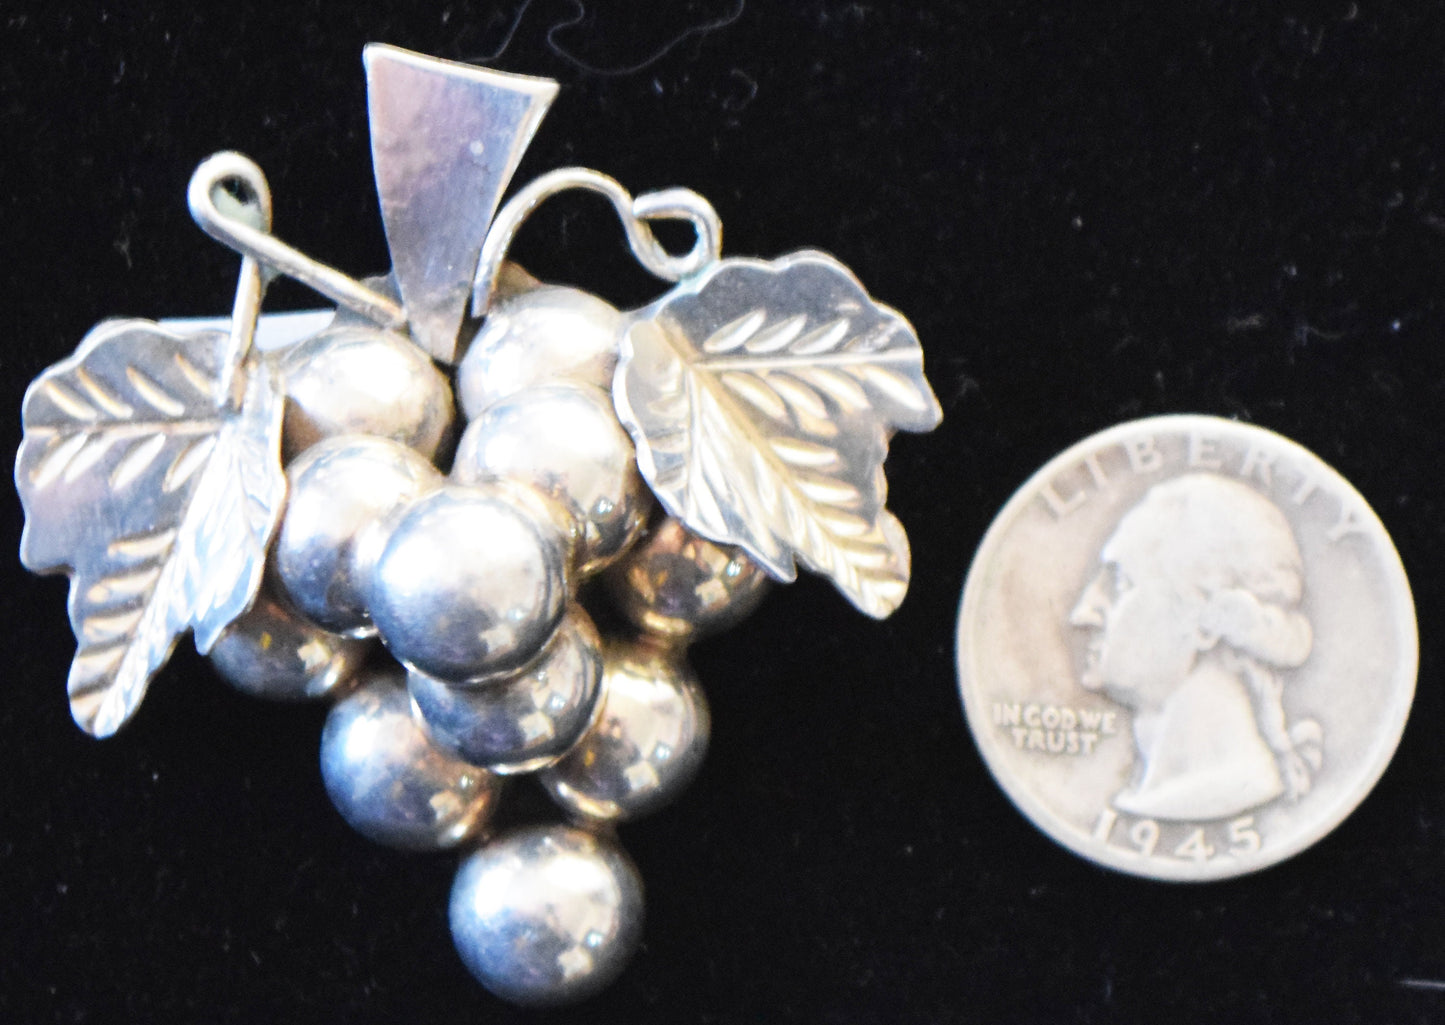 Heavy 1970s pin/pendant featuring grape leaf and grapes in sterling silver.